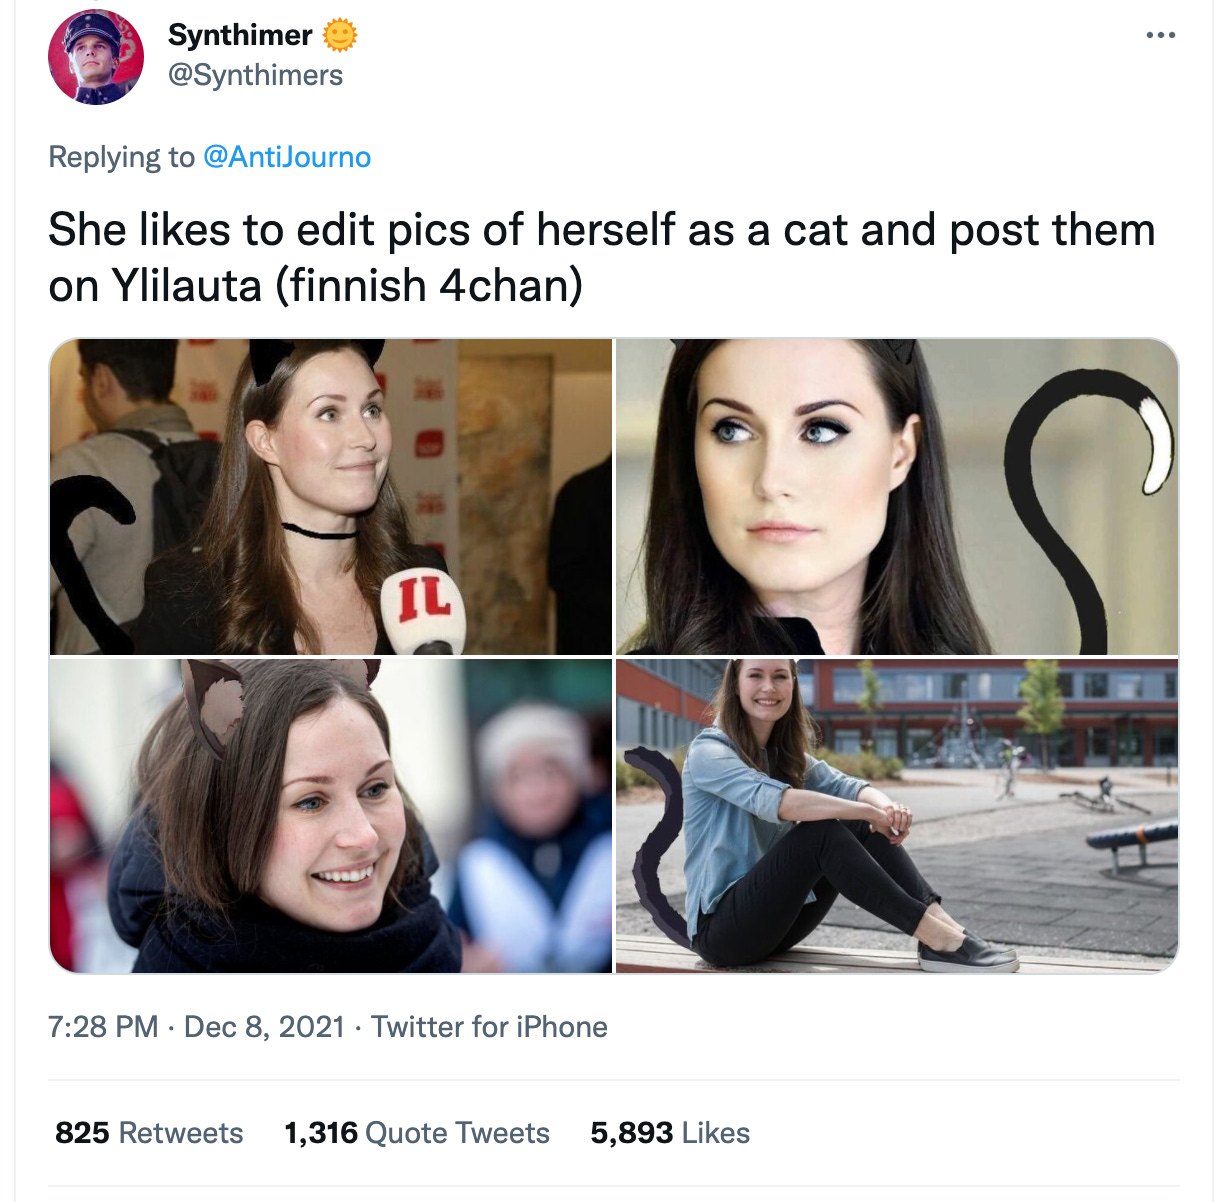 If they research creating IRL catgirls we will take down this post